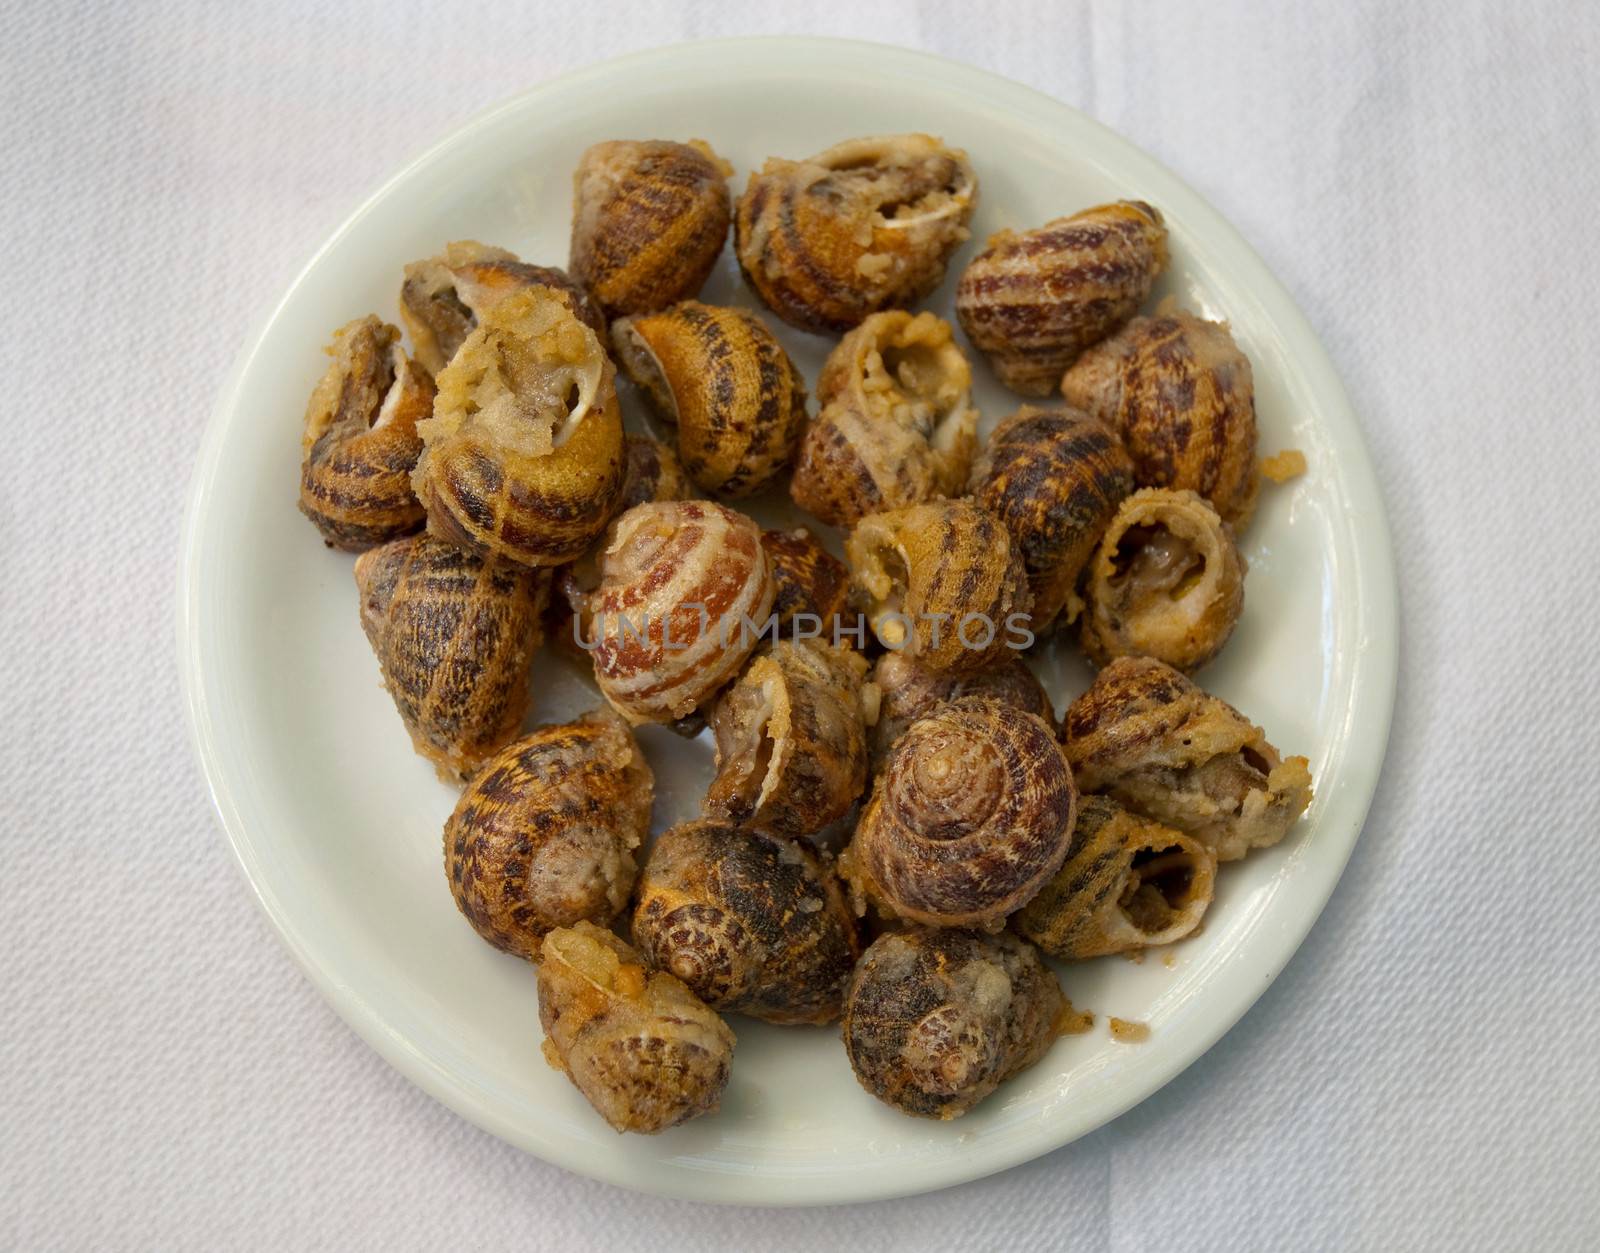 Fried snail on a white plate.